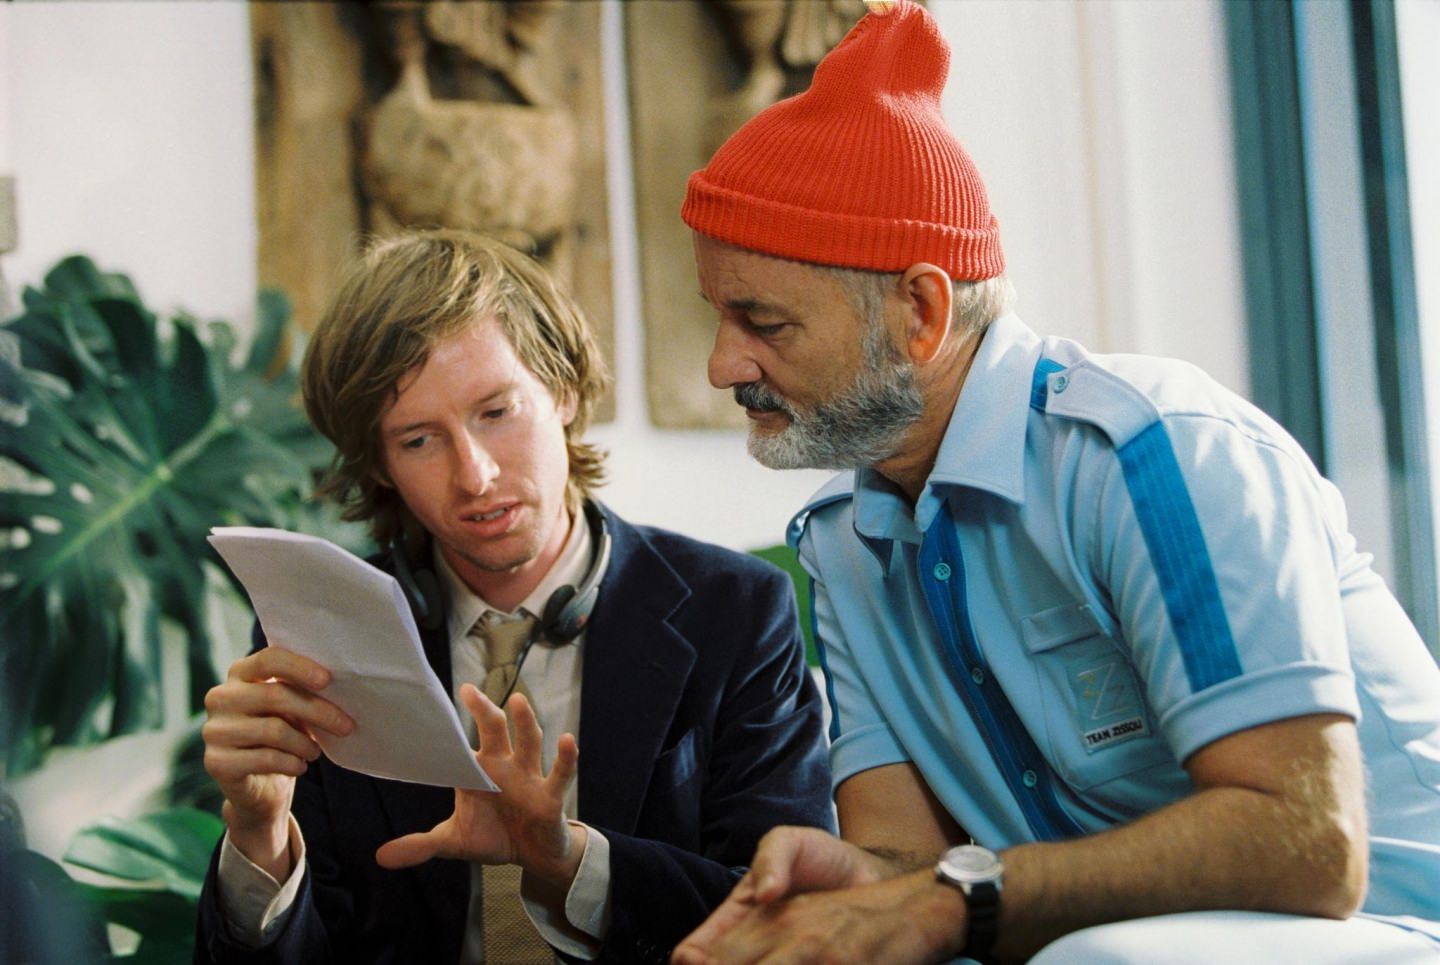 picture-of-bill-murray-and-wes-anderson-in-the-life-aquatic-with-steve-zissou-large-picture-life-aquatic-804281921